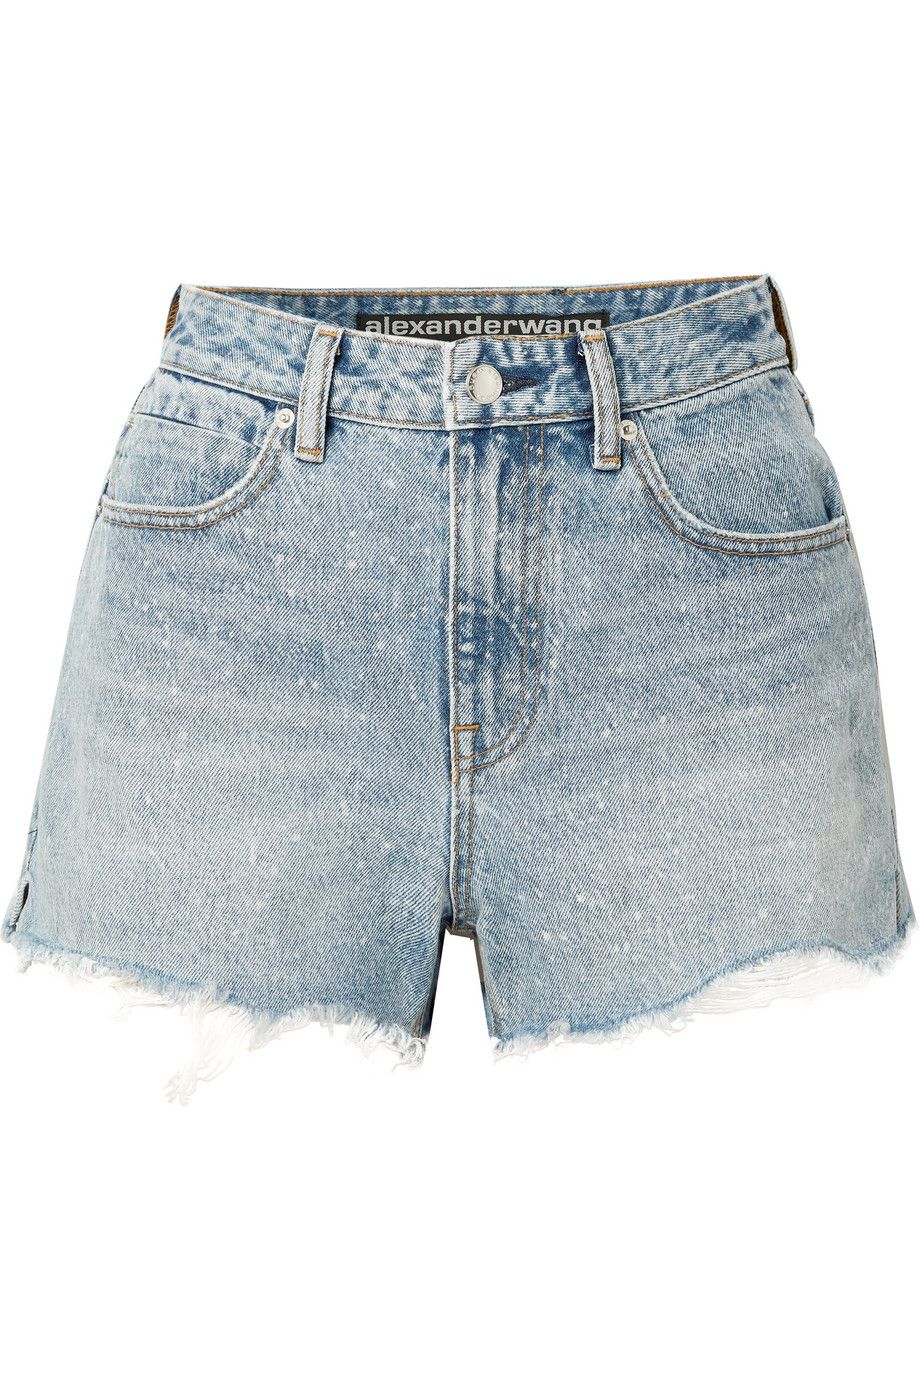 Y/Project Releases Denim Brief-Style Short Shorts & the Internet Reactions  Are Hilarious